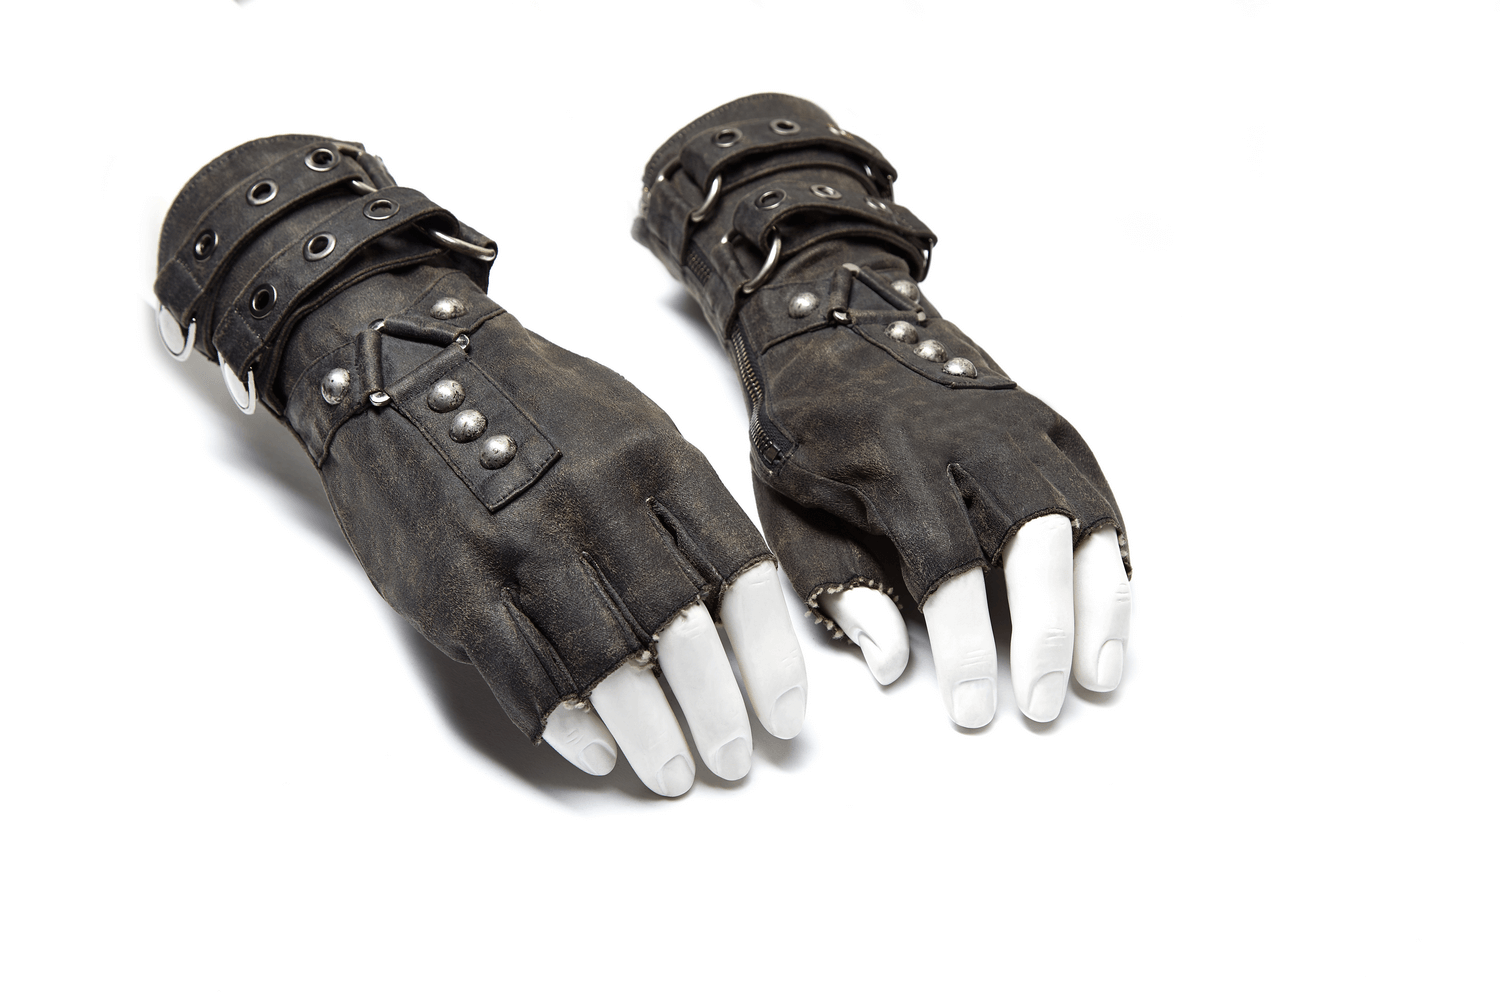 Durable Steampunk-Style Leather Gauntlet Gloves - HARD'N'HEAVY